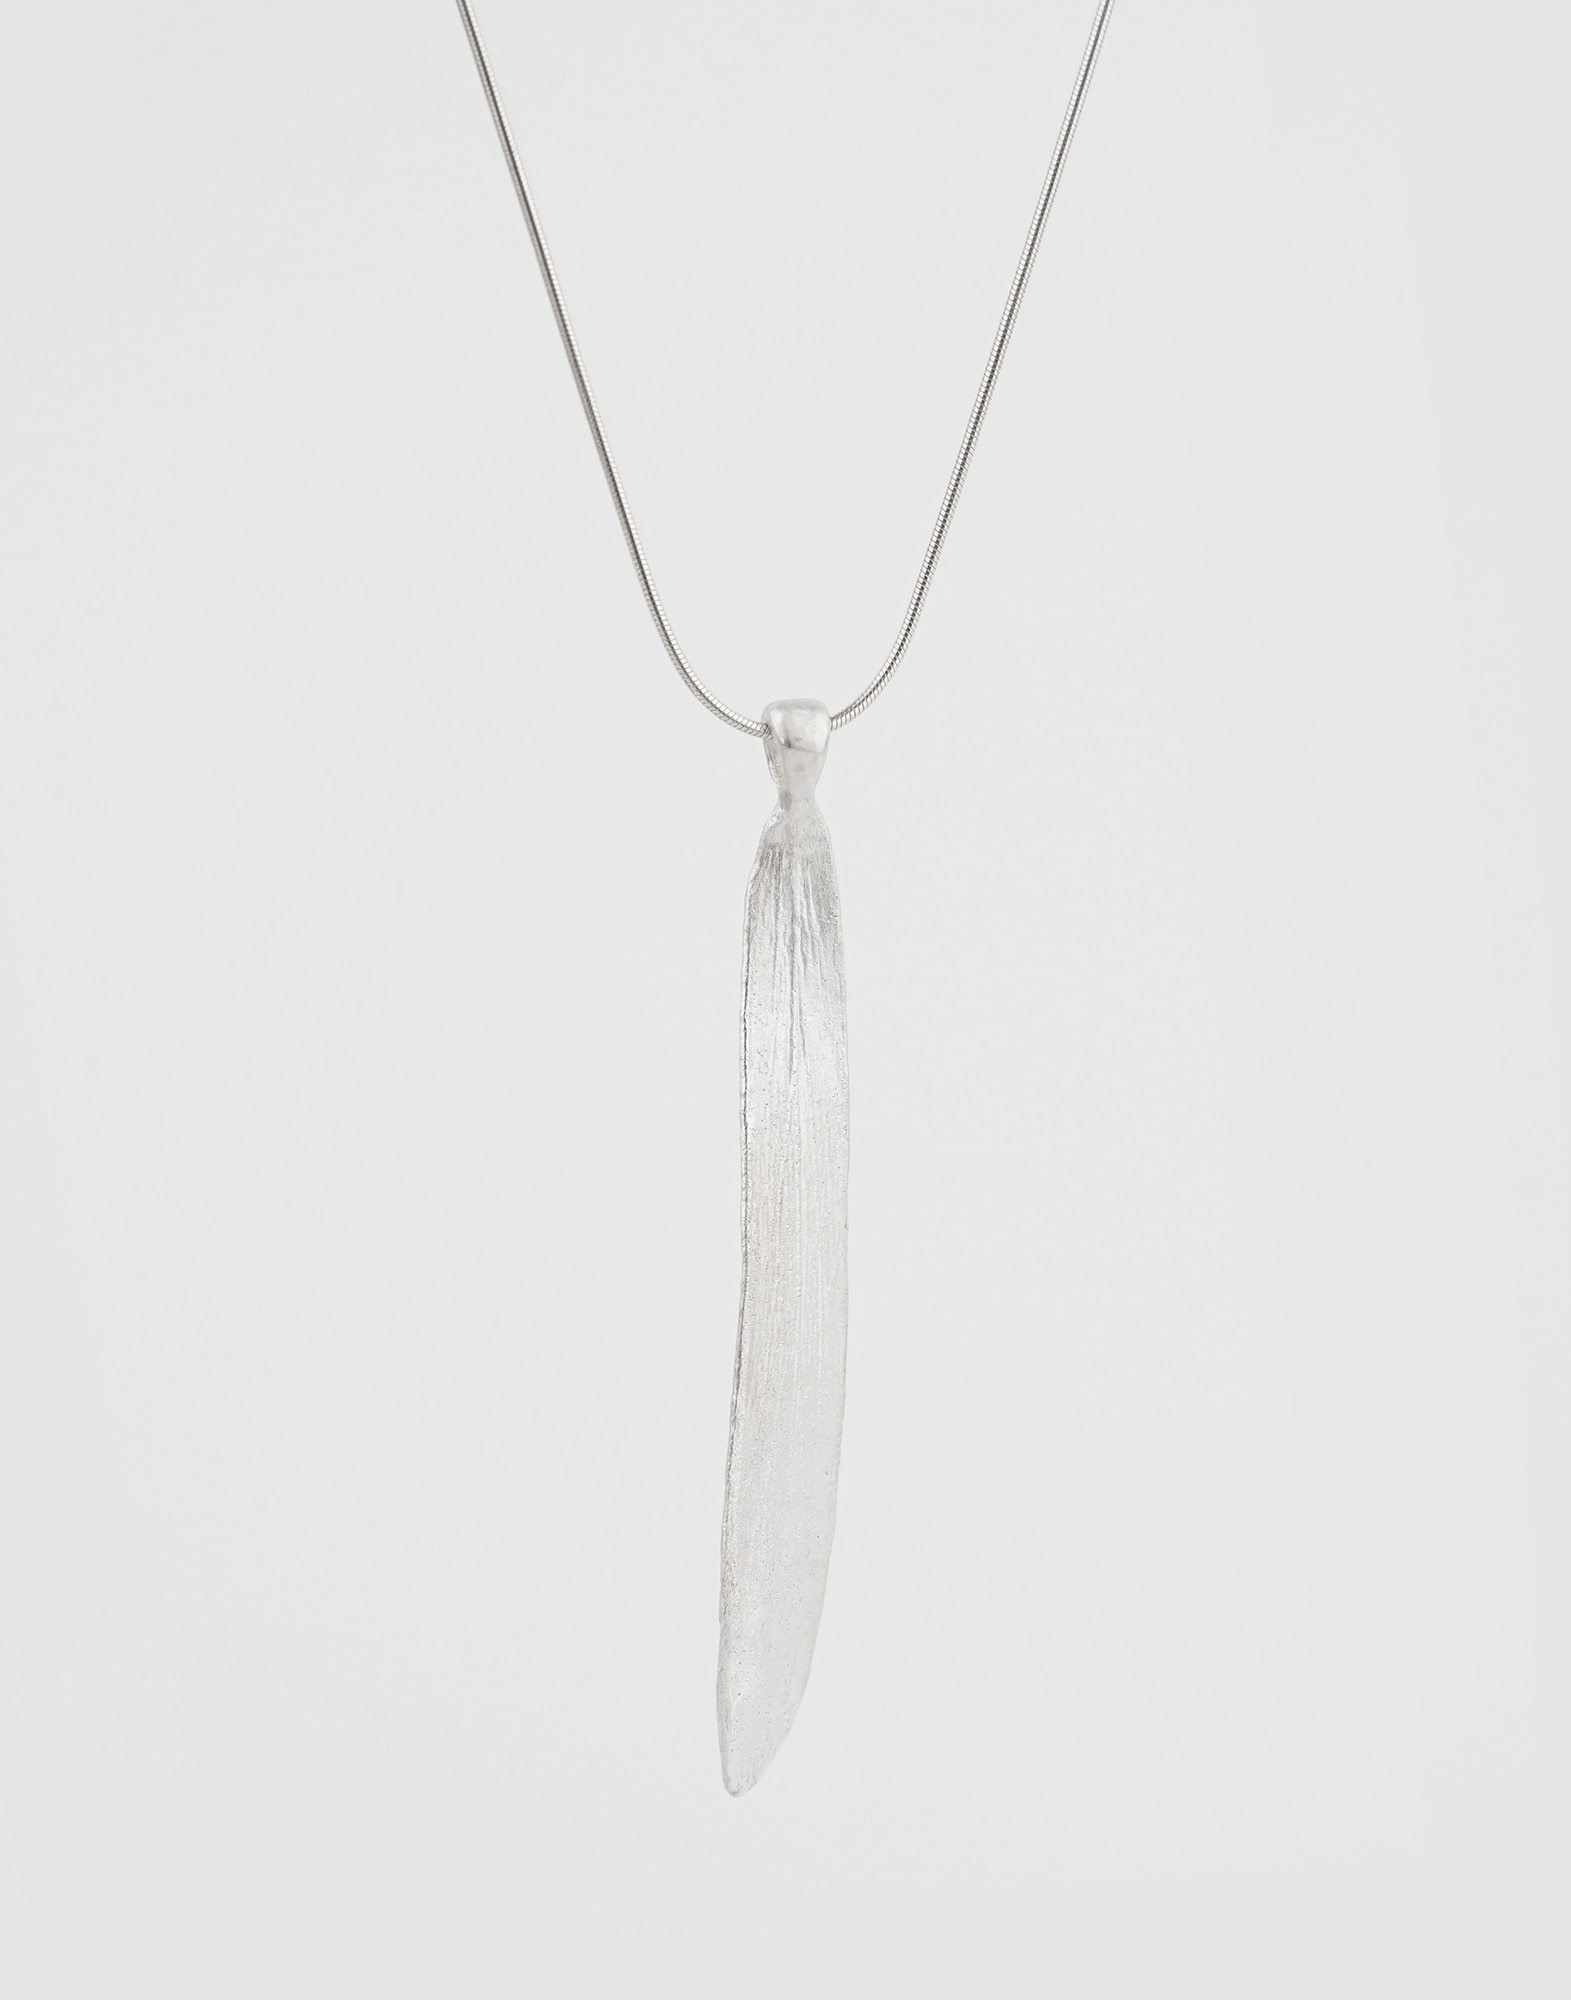 Leaf necklace (long chain)